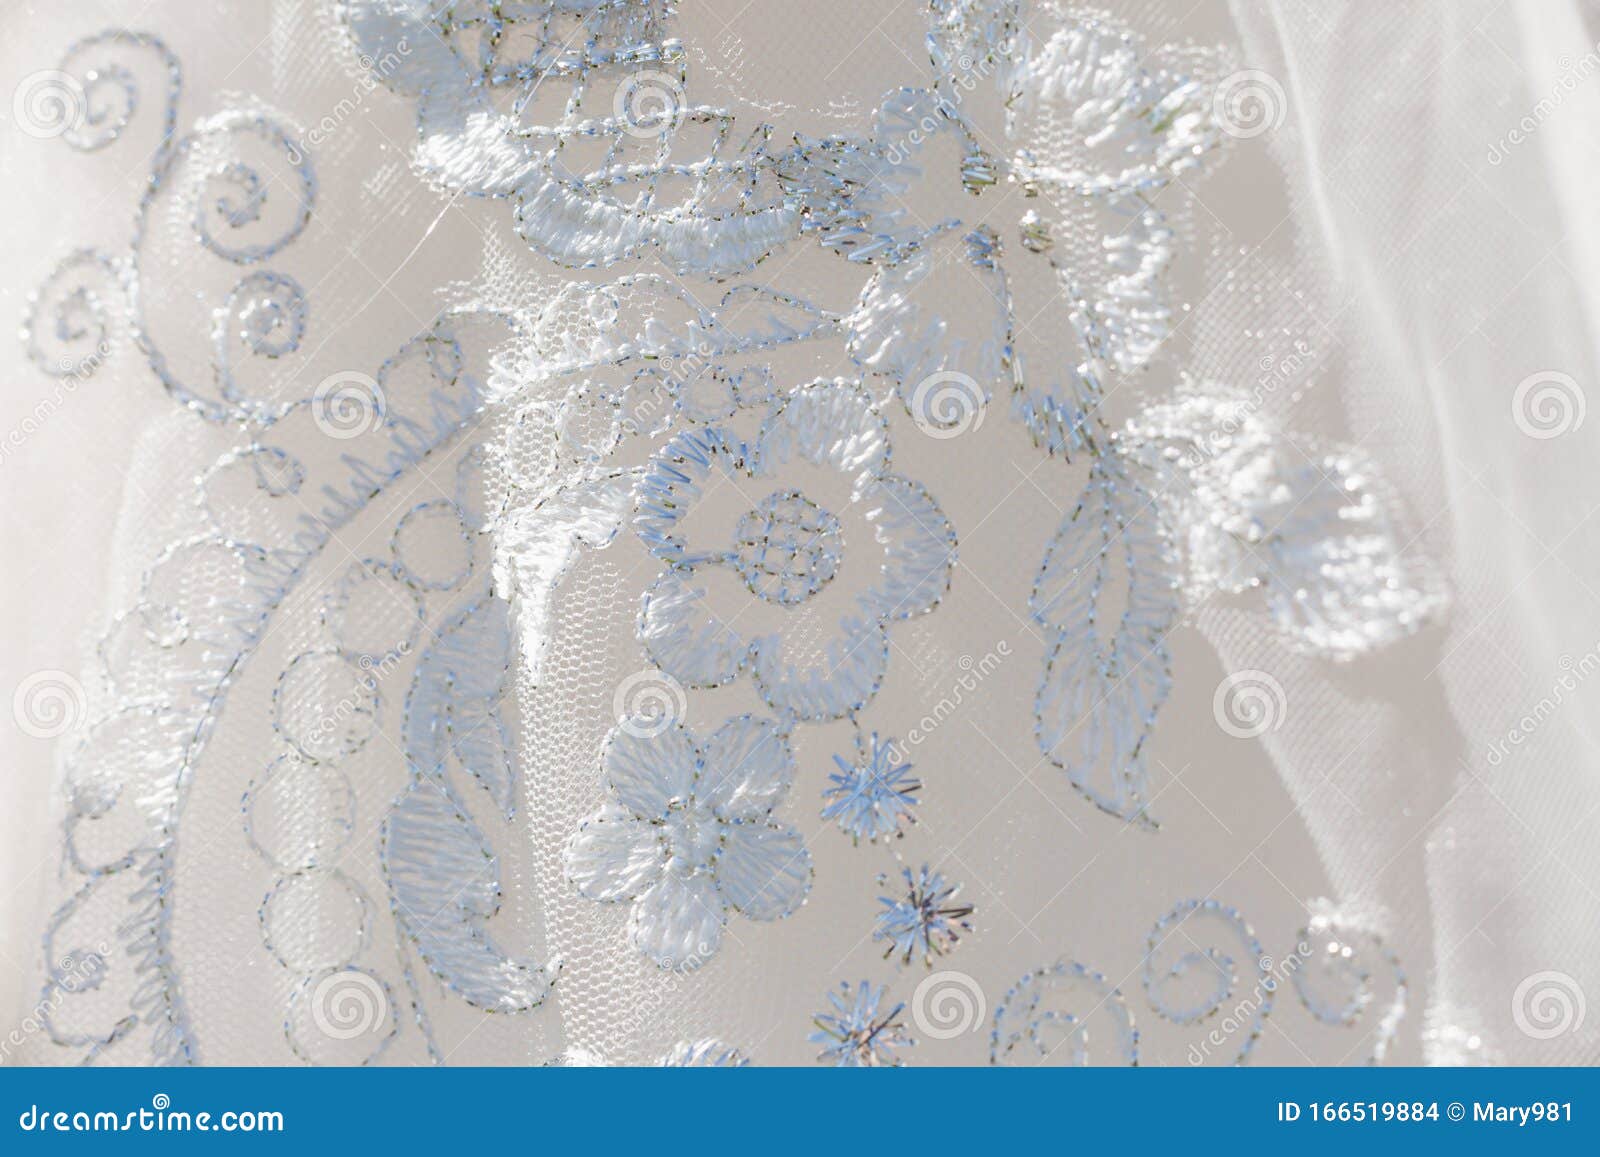 Wedding Dress Lace Intricate Embroidery Stock Photo - Image of lace ...